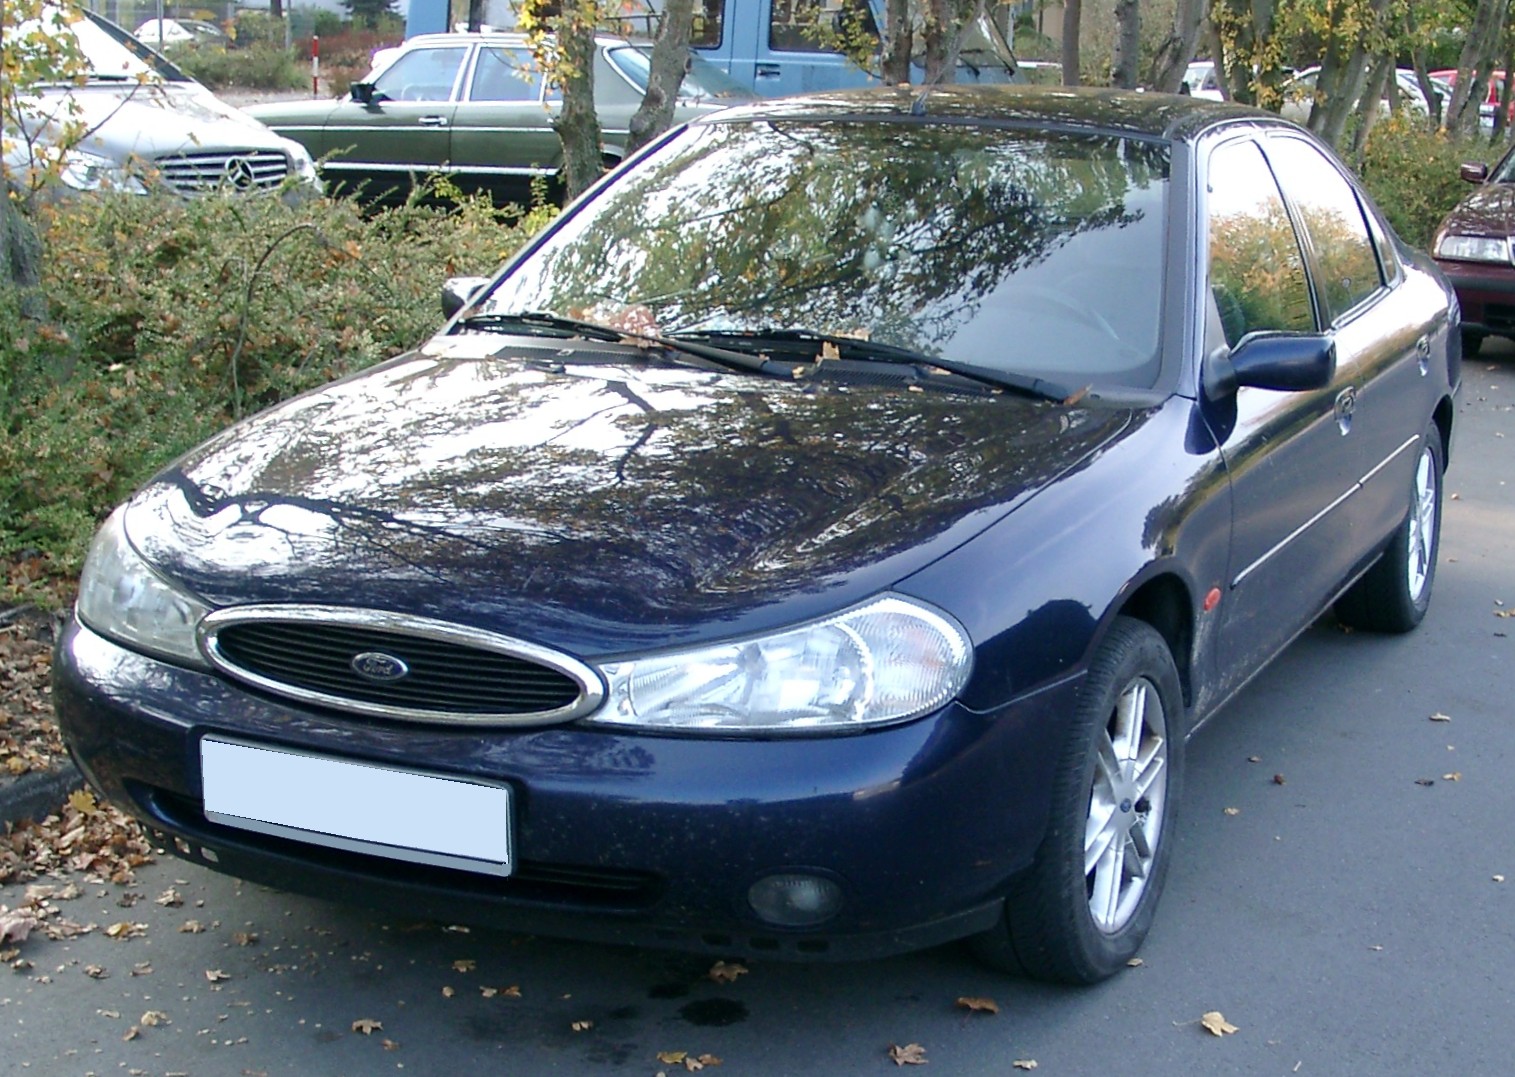 File:Opel Astra G Coupe front 20071011.jpg - Wikimedia Commons